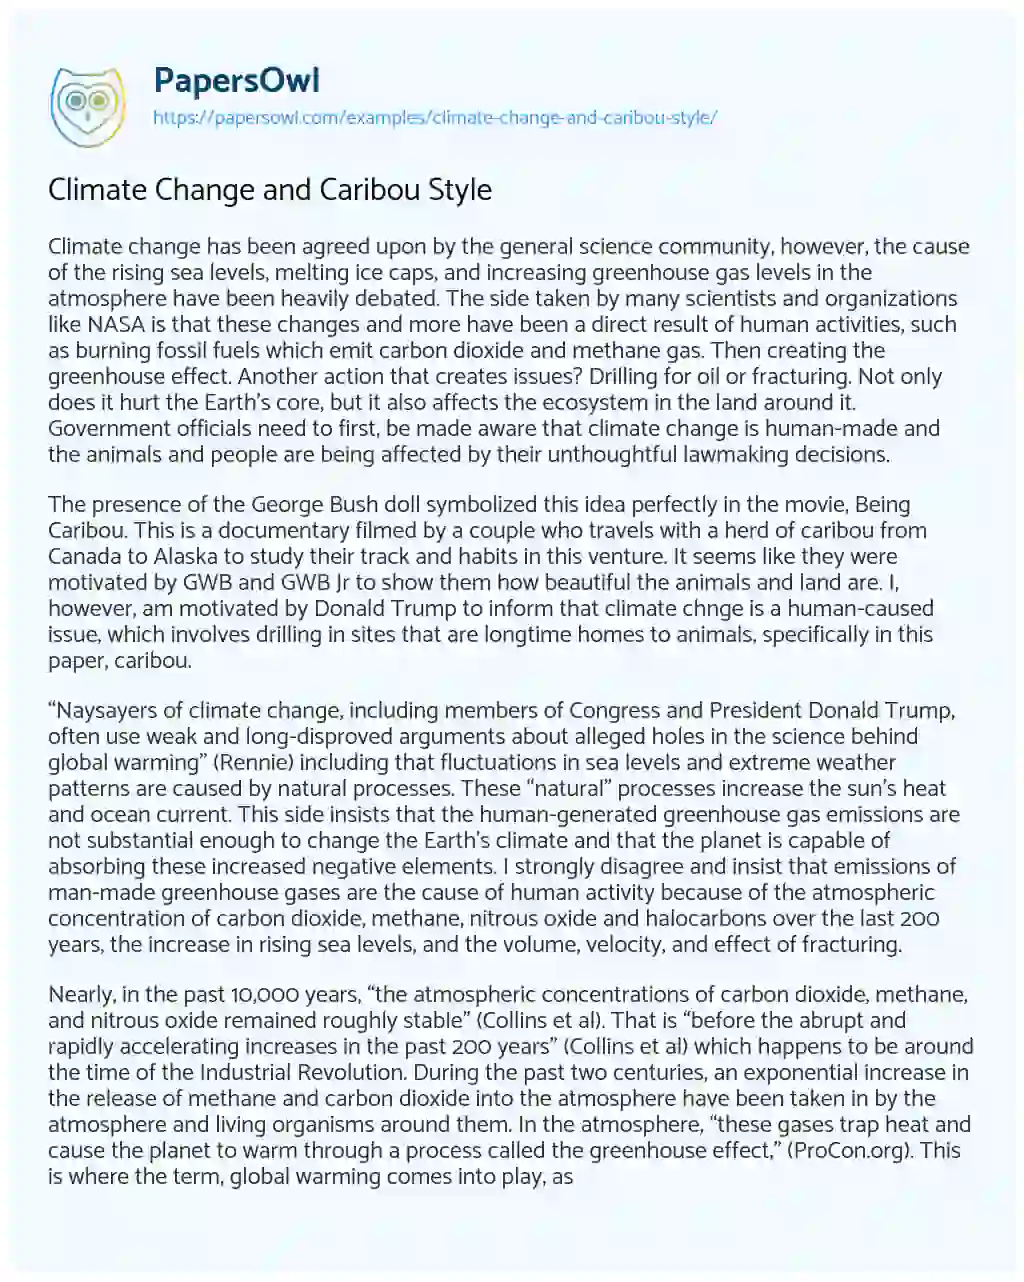 Essay on Climate Change and Caribou Style